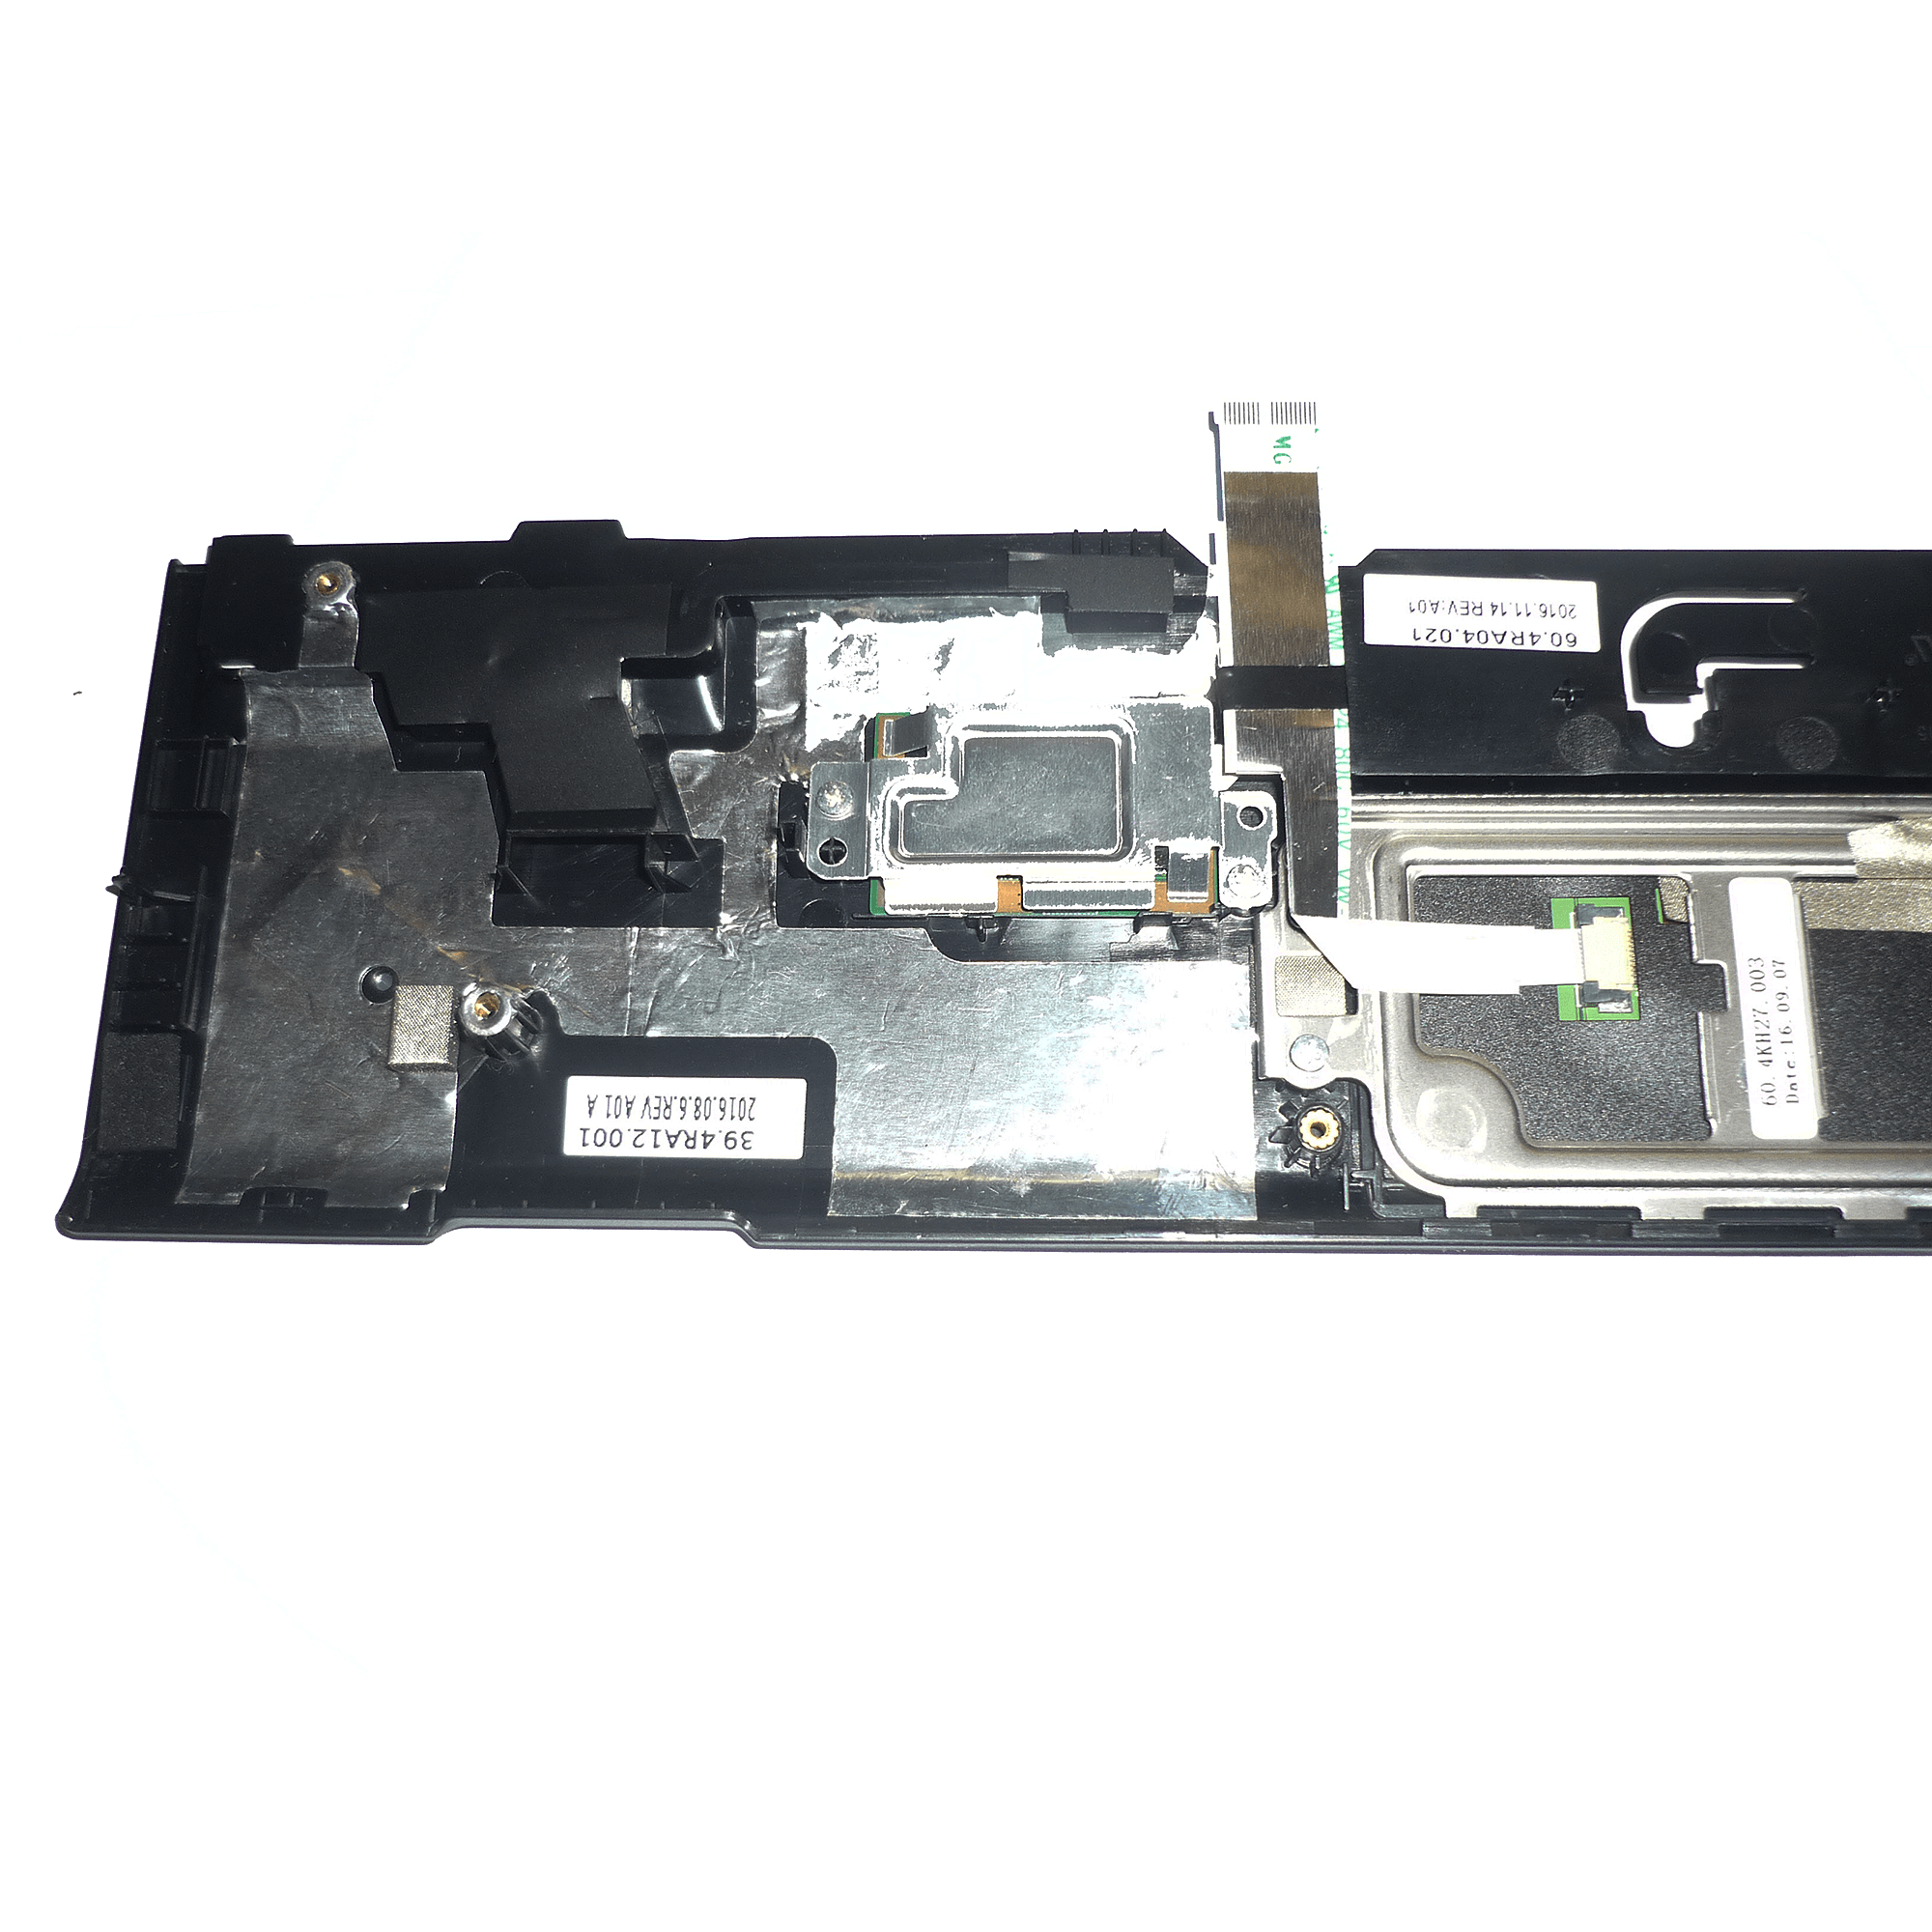 Lenovo ThinkPad X230 X230i Installation Ready Complete Palmrest, Touchpad with pre installed Sensor PCB, FPR Click Board and Ribbons ZVOT739 | 04W3725 |00HT288 | 60.4RA04.021